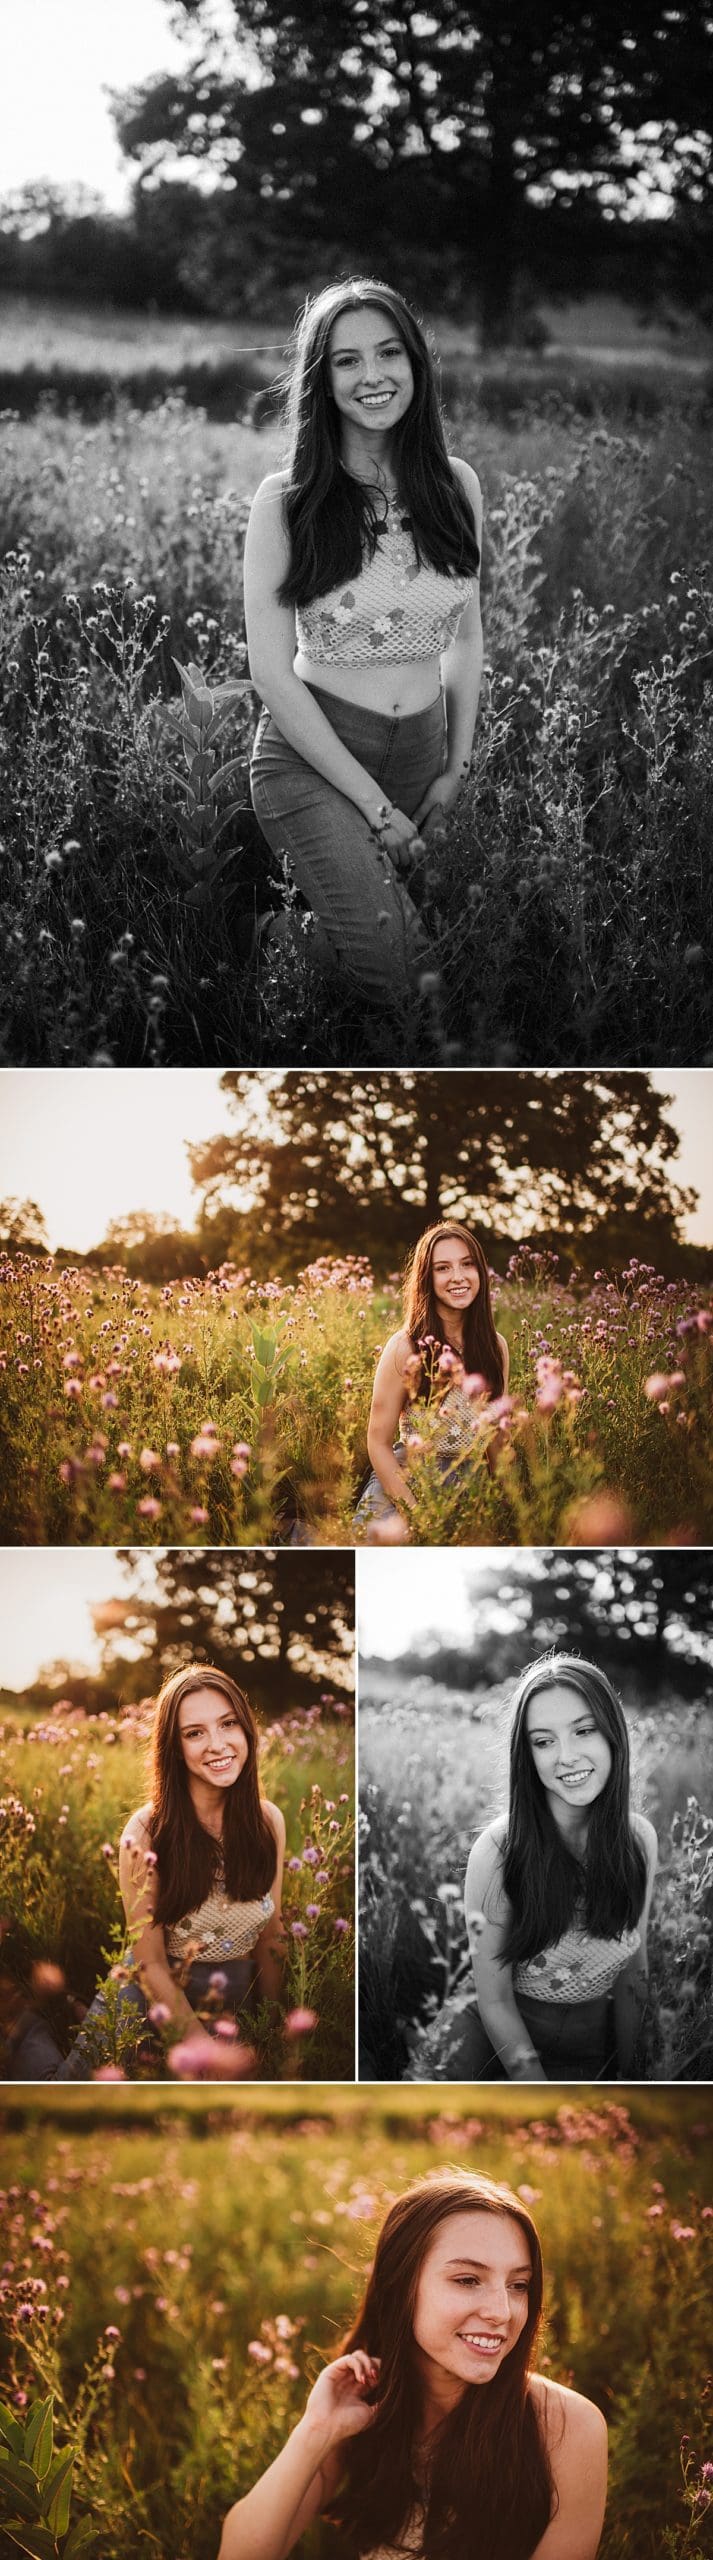 golden hour sunset portraits in field of flowers